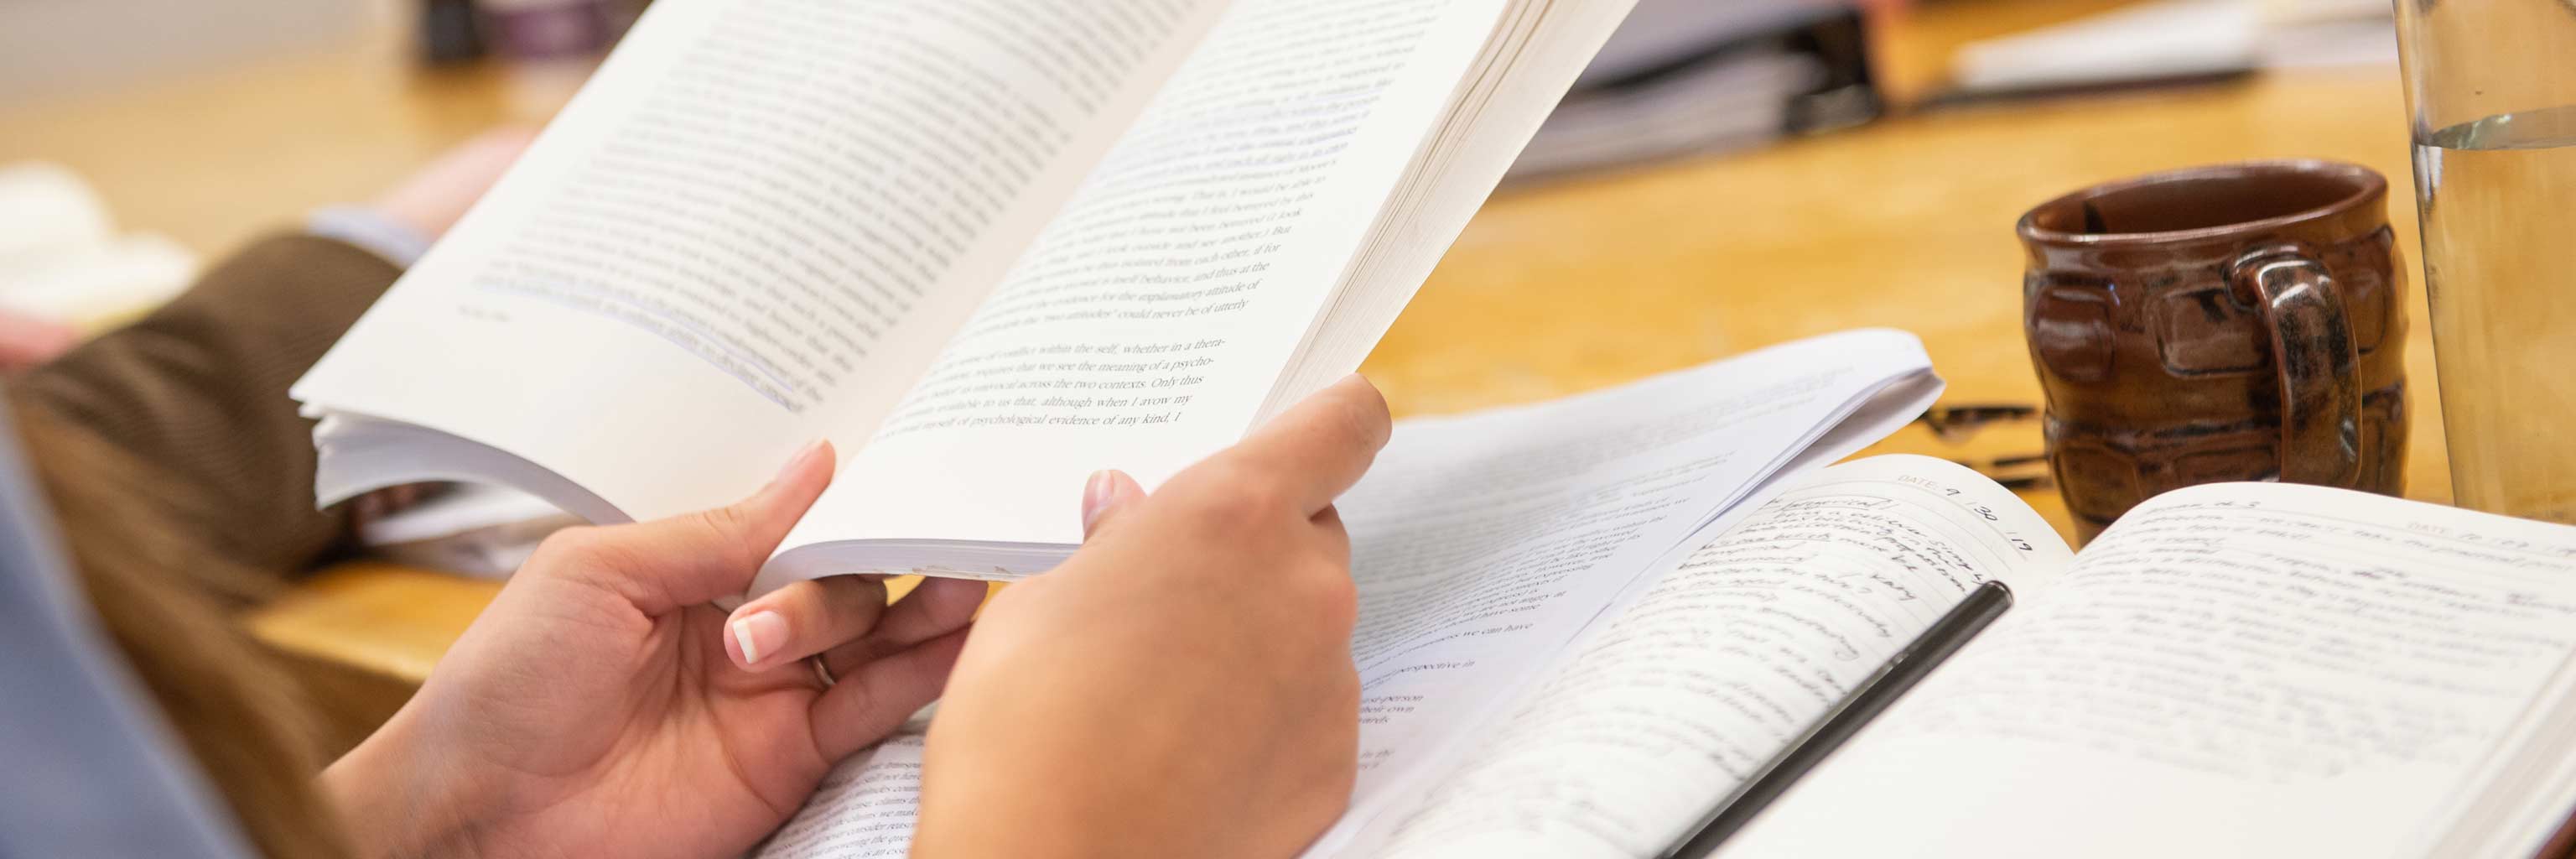 Close up of hands holding a book.